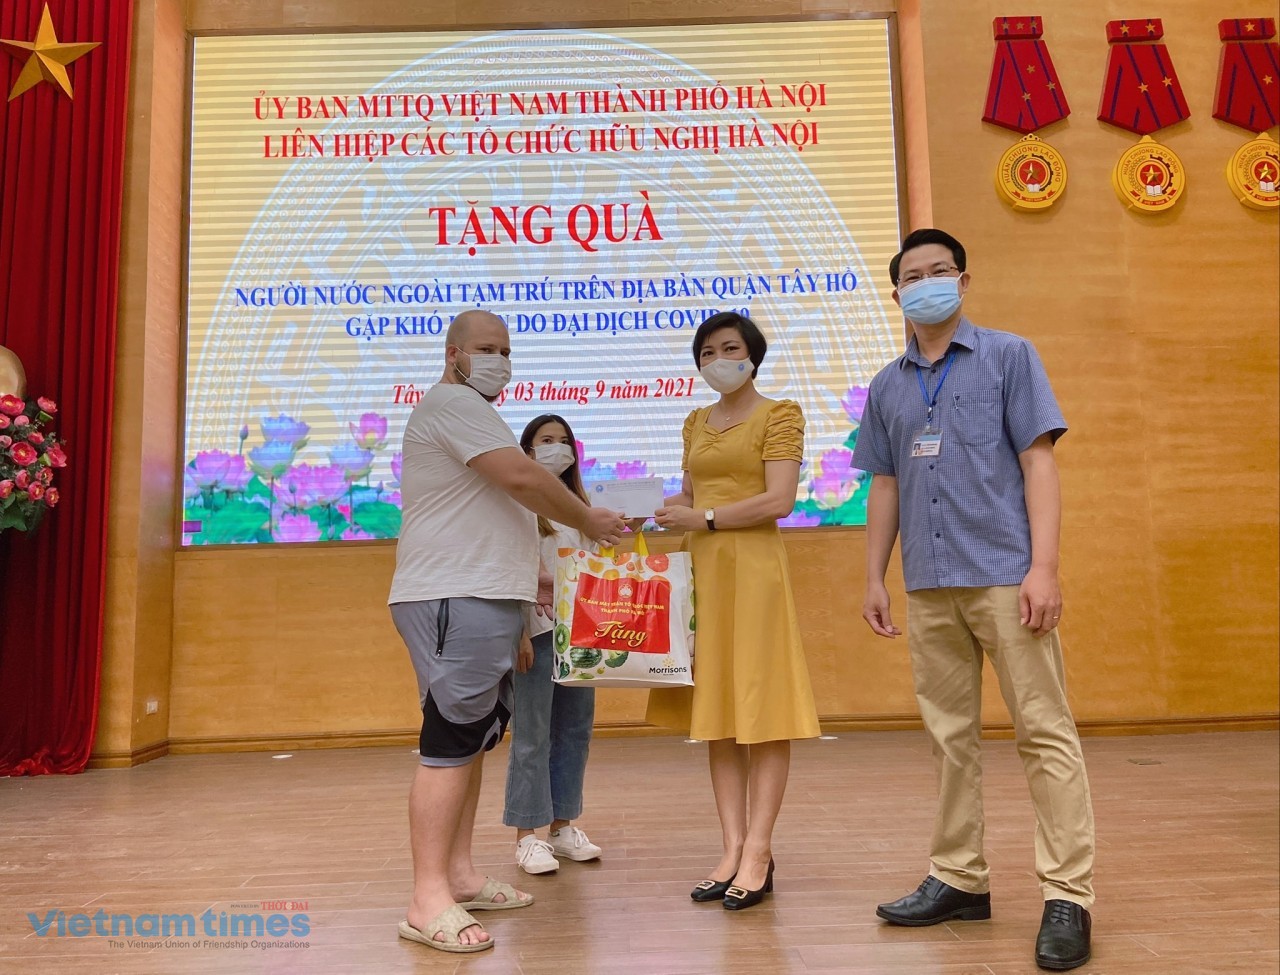 Expats Surprised to Get Aid Packages from Vietnamese Government